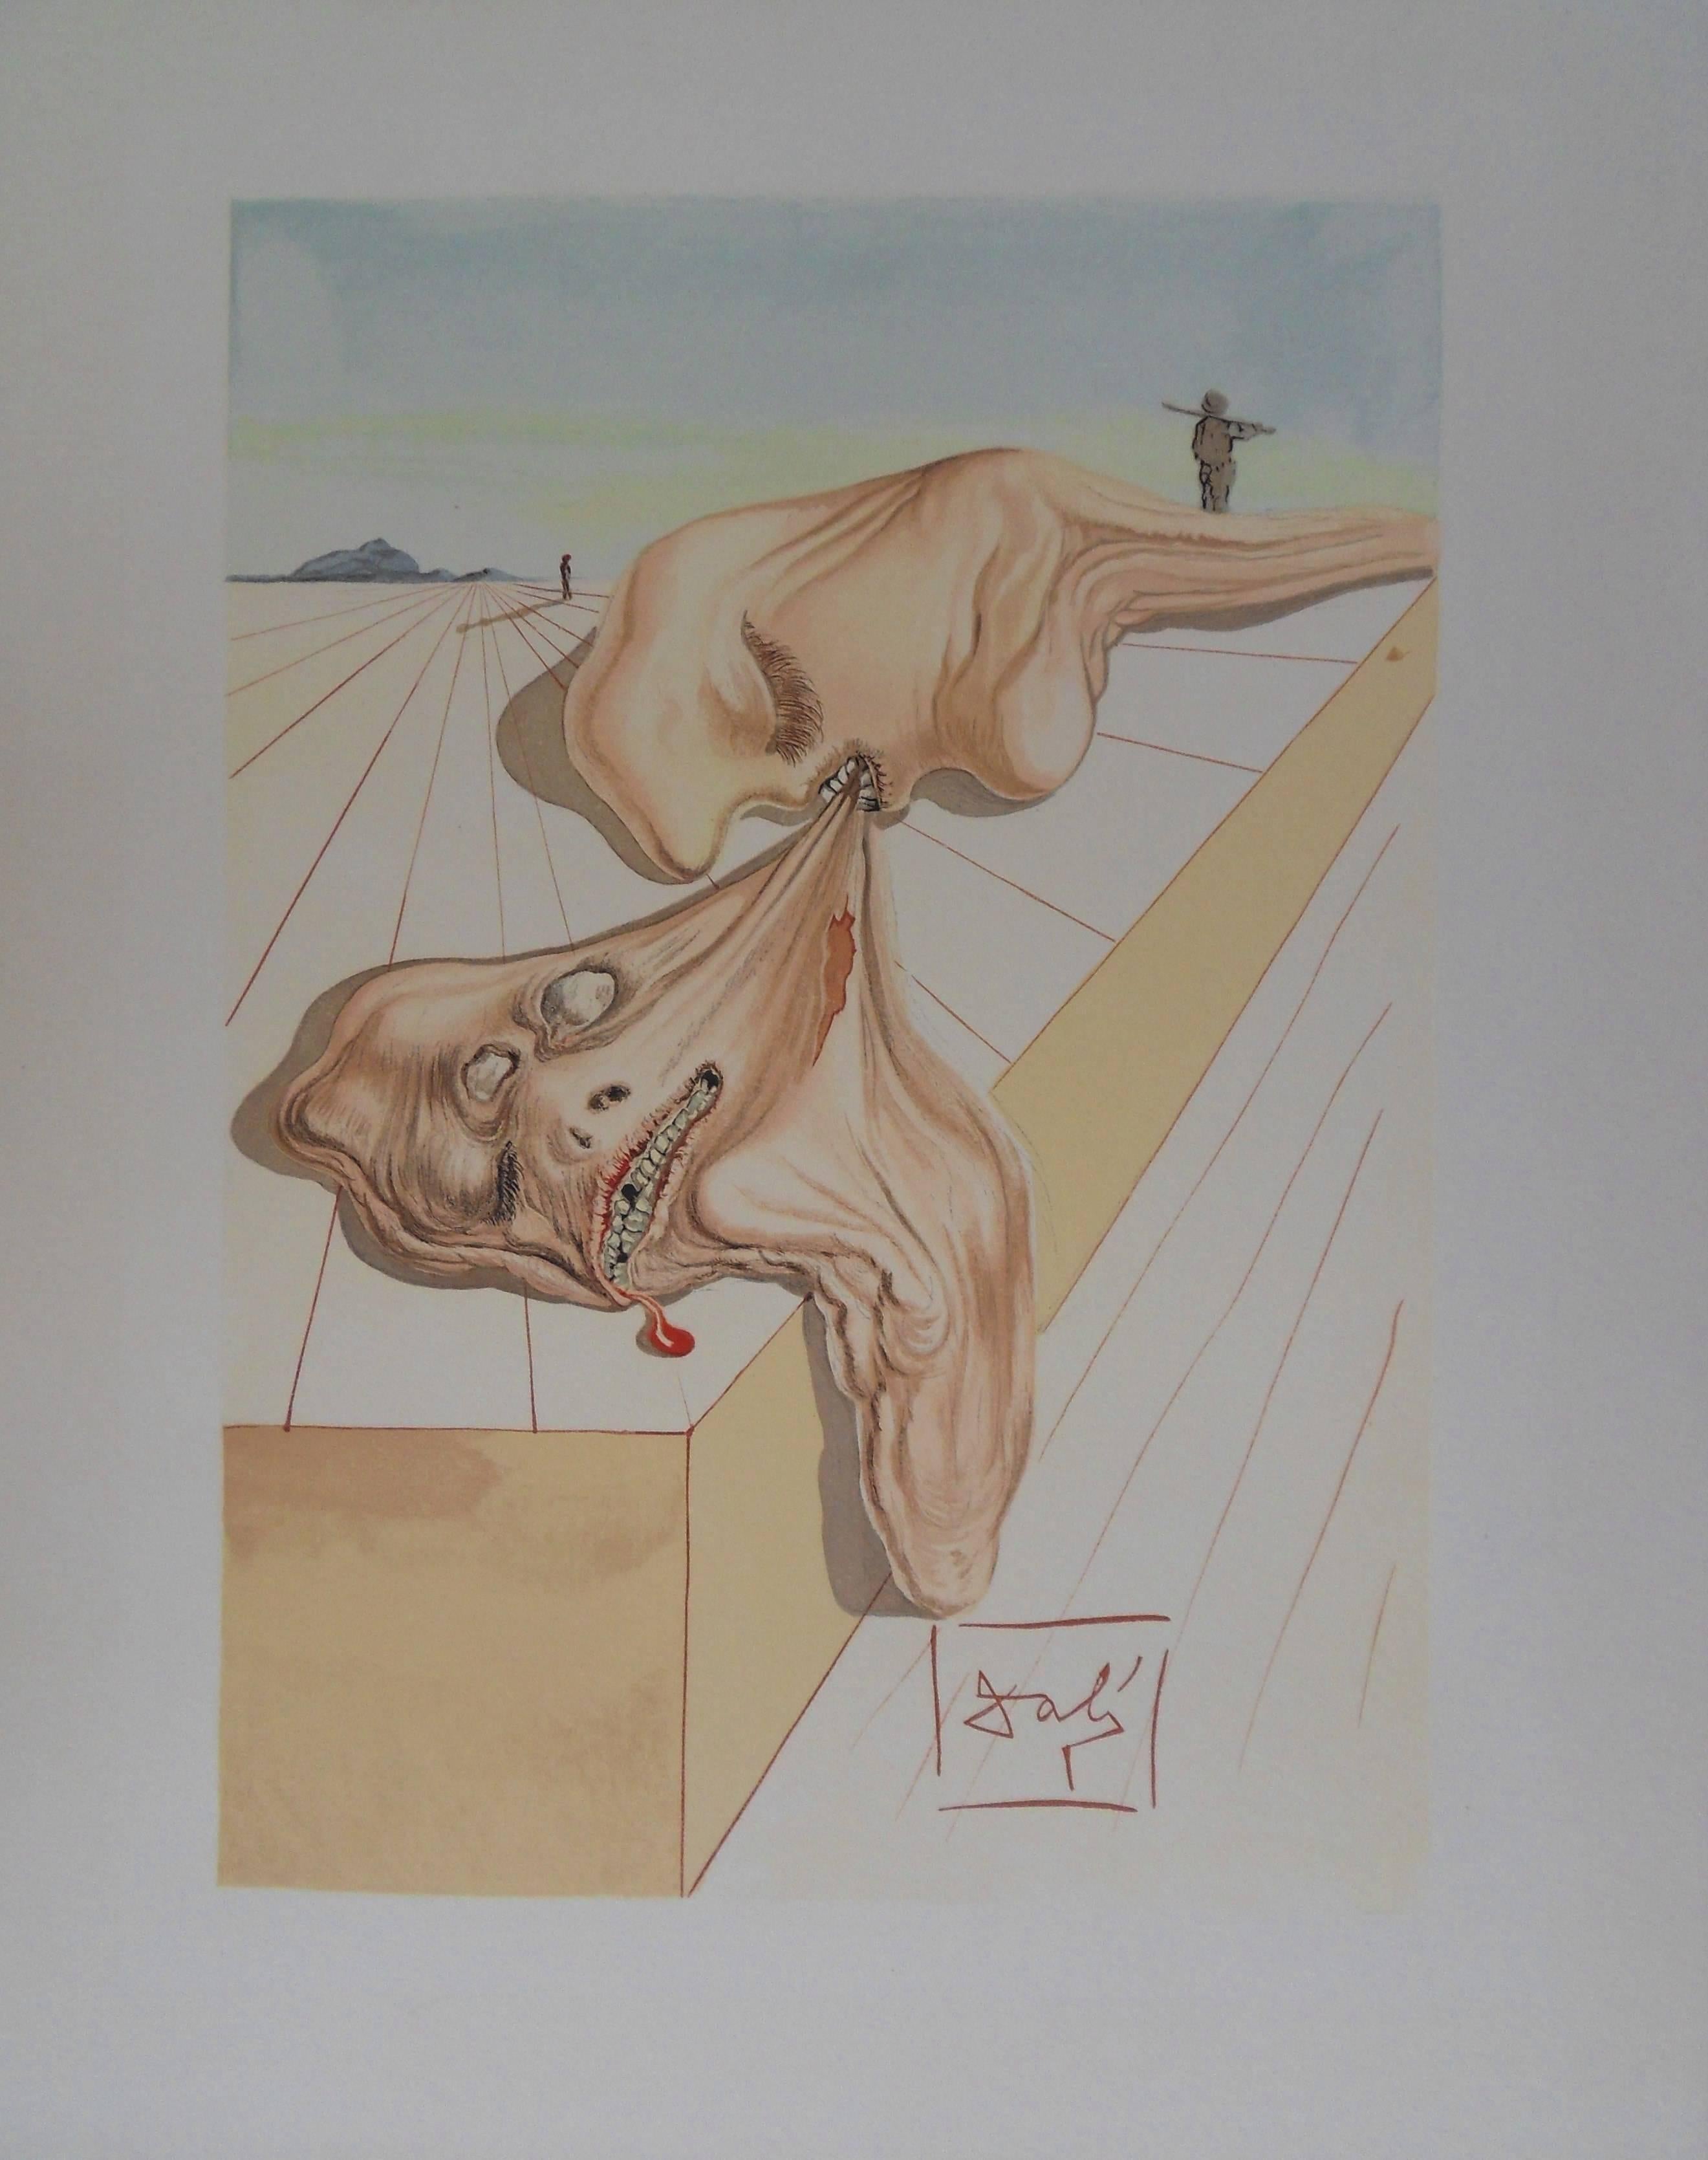 Salvador Dalí Figurative Print - Hell 30 - The Men Who Eat Each Other - woodcut - 1963